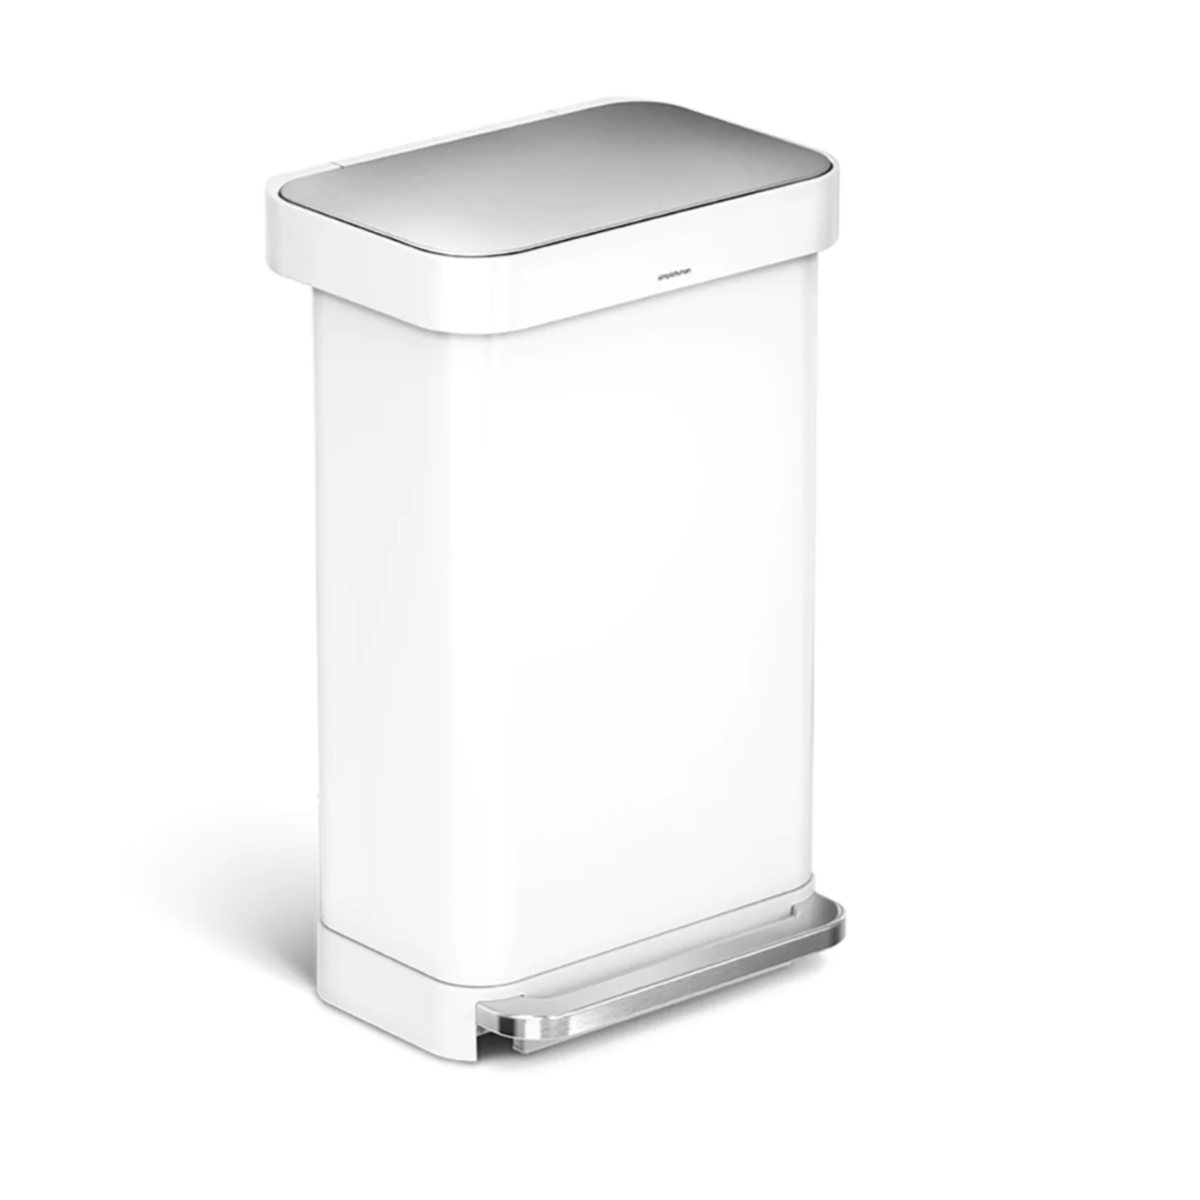 https://www.containerstore.com/catalogimages/481823/10093410.jpg